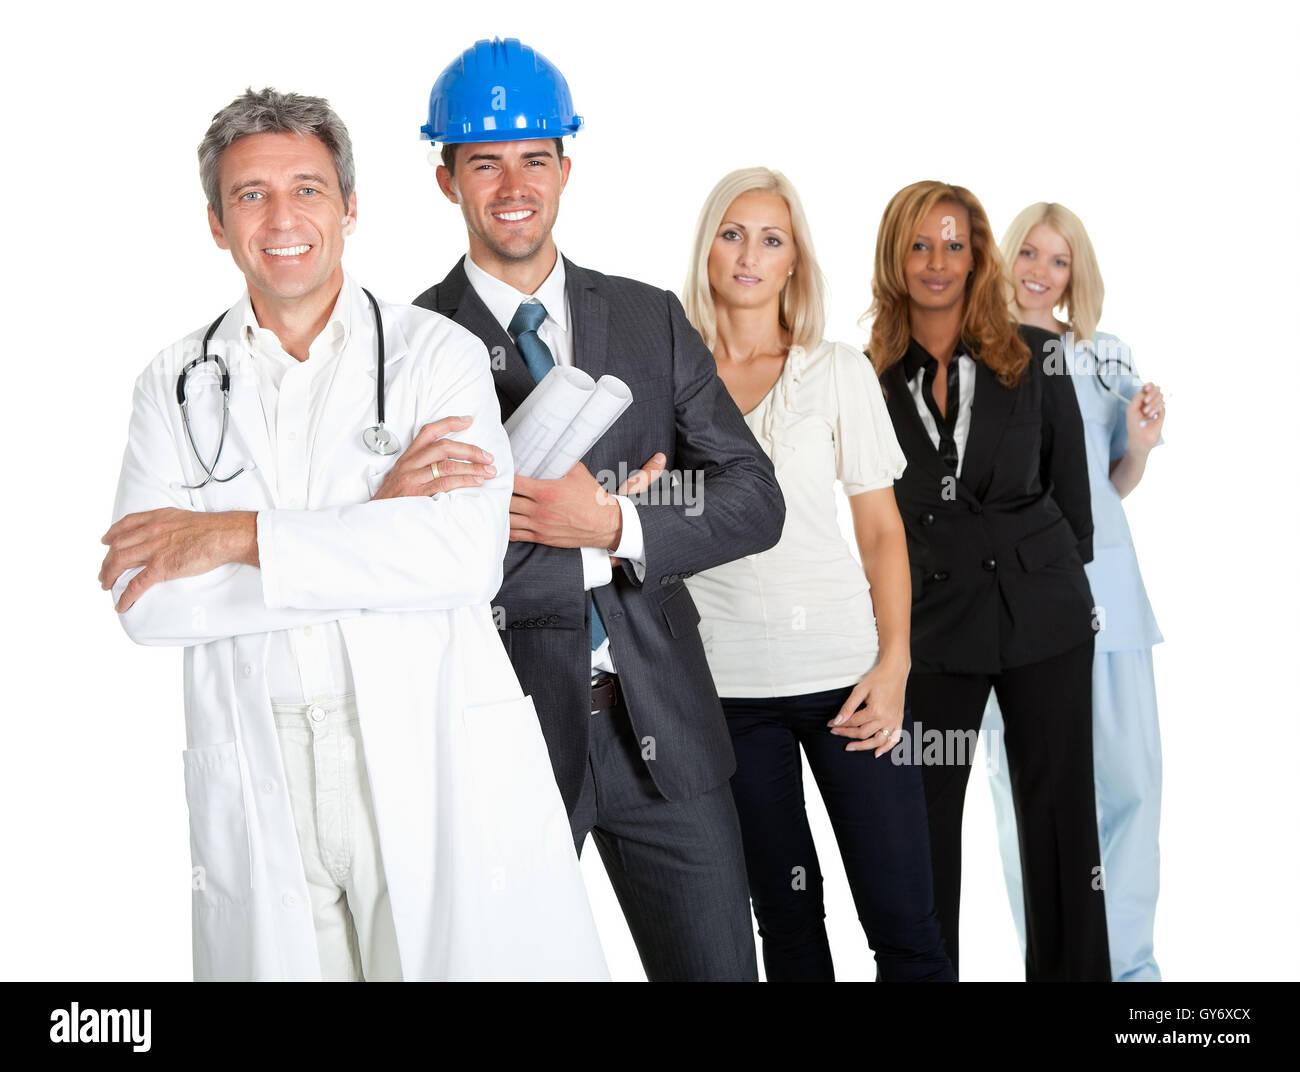 People illustrating different career options Stock Photo